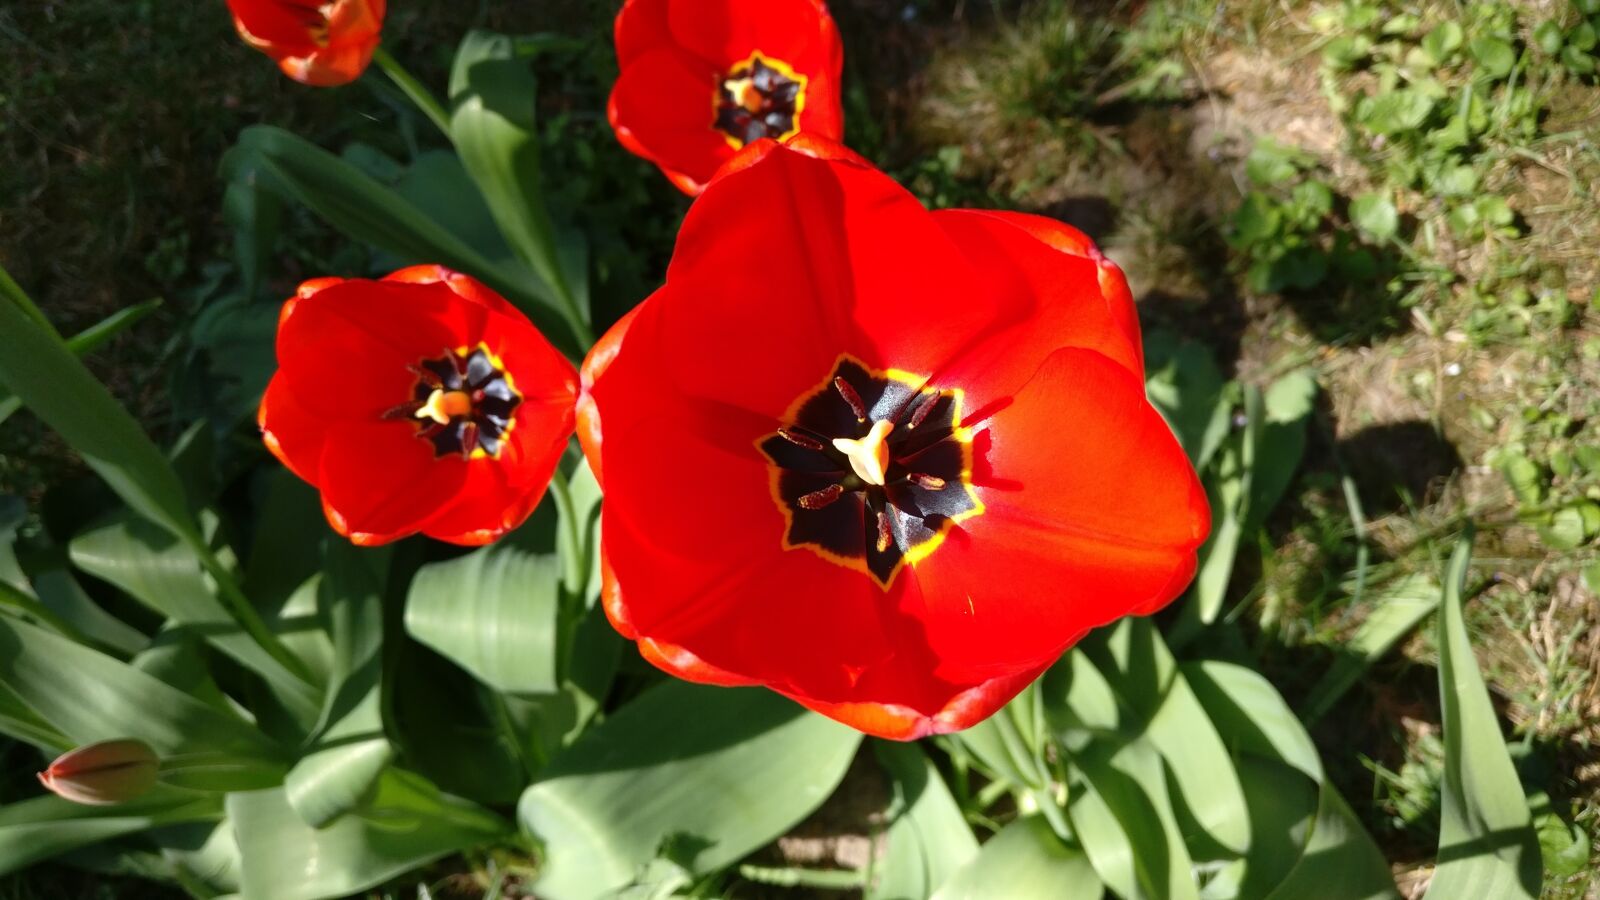 OnePlus A3003 sample photo. Tulip, flower, tulips photography